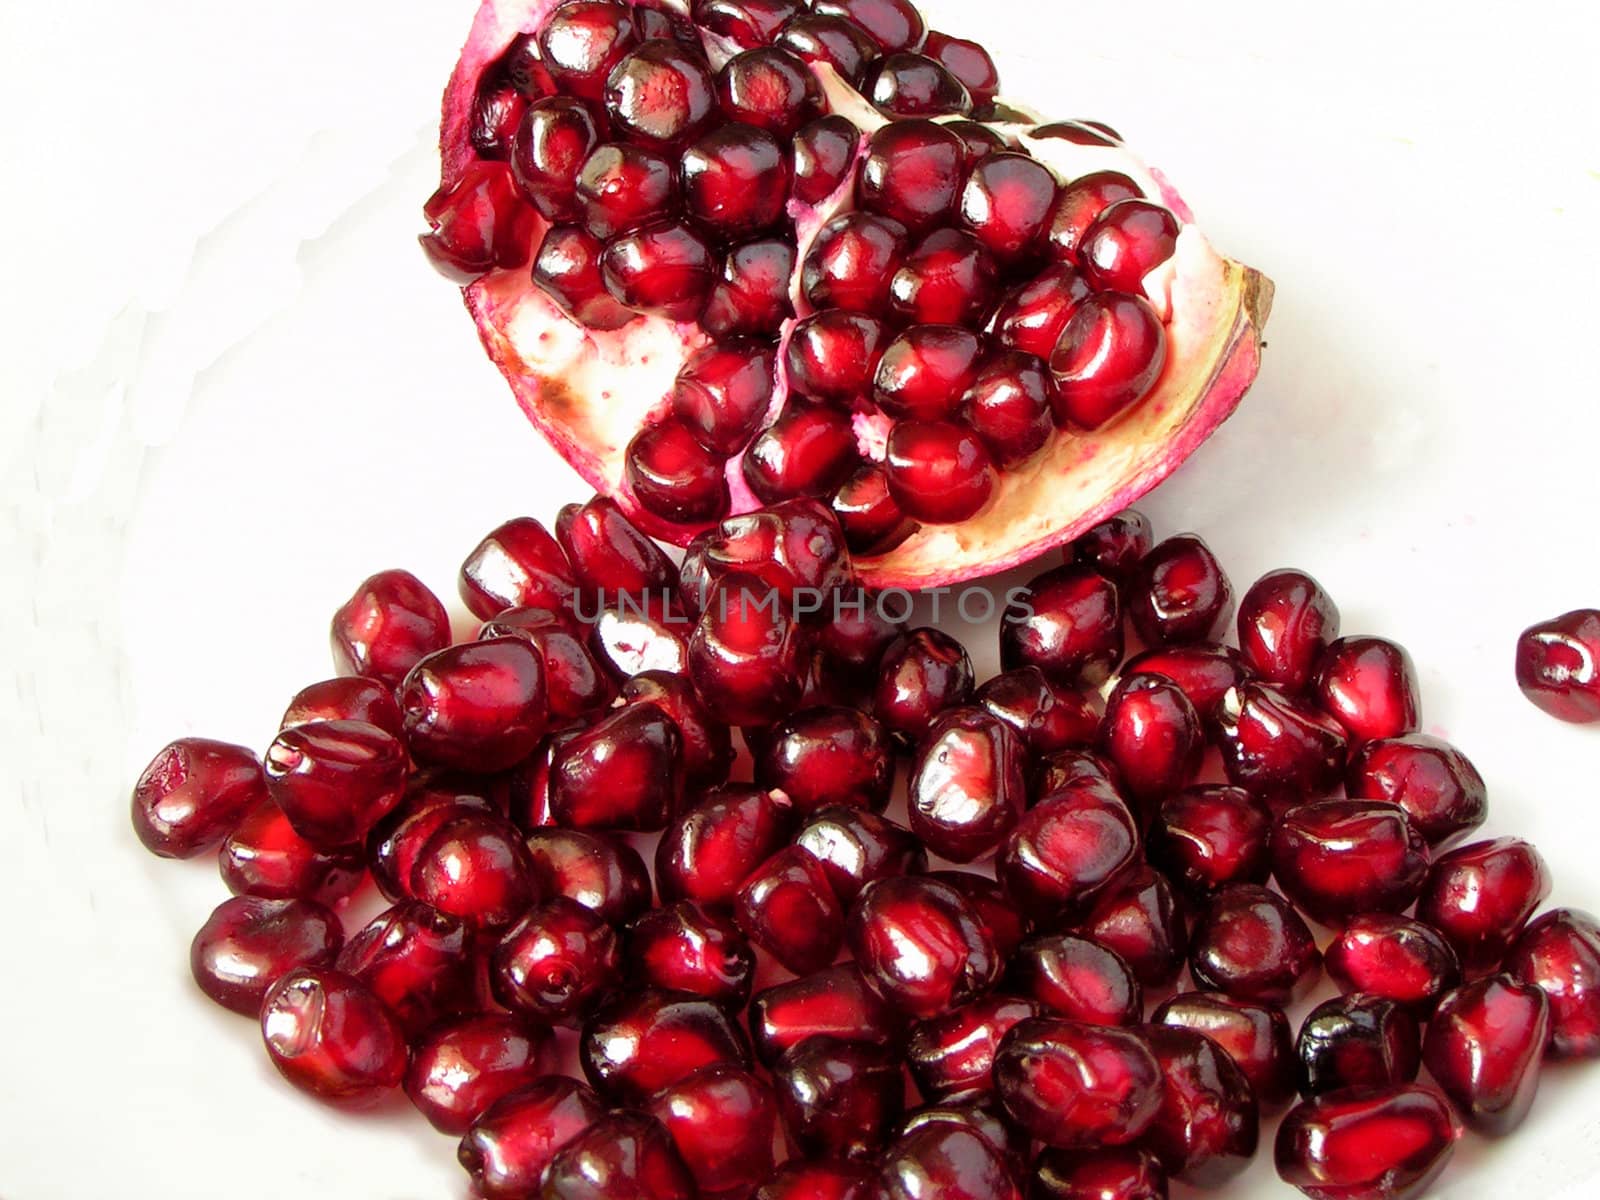 Pomegranate on a white background     